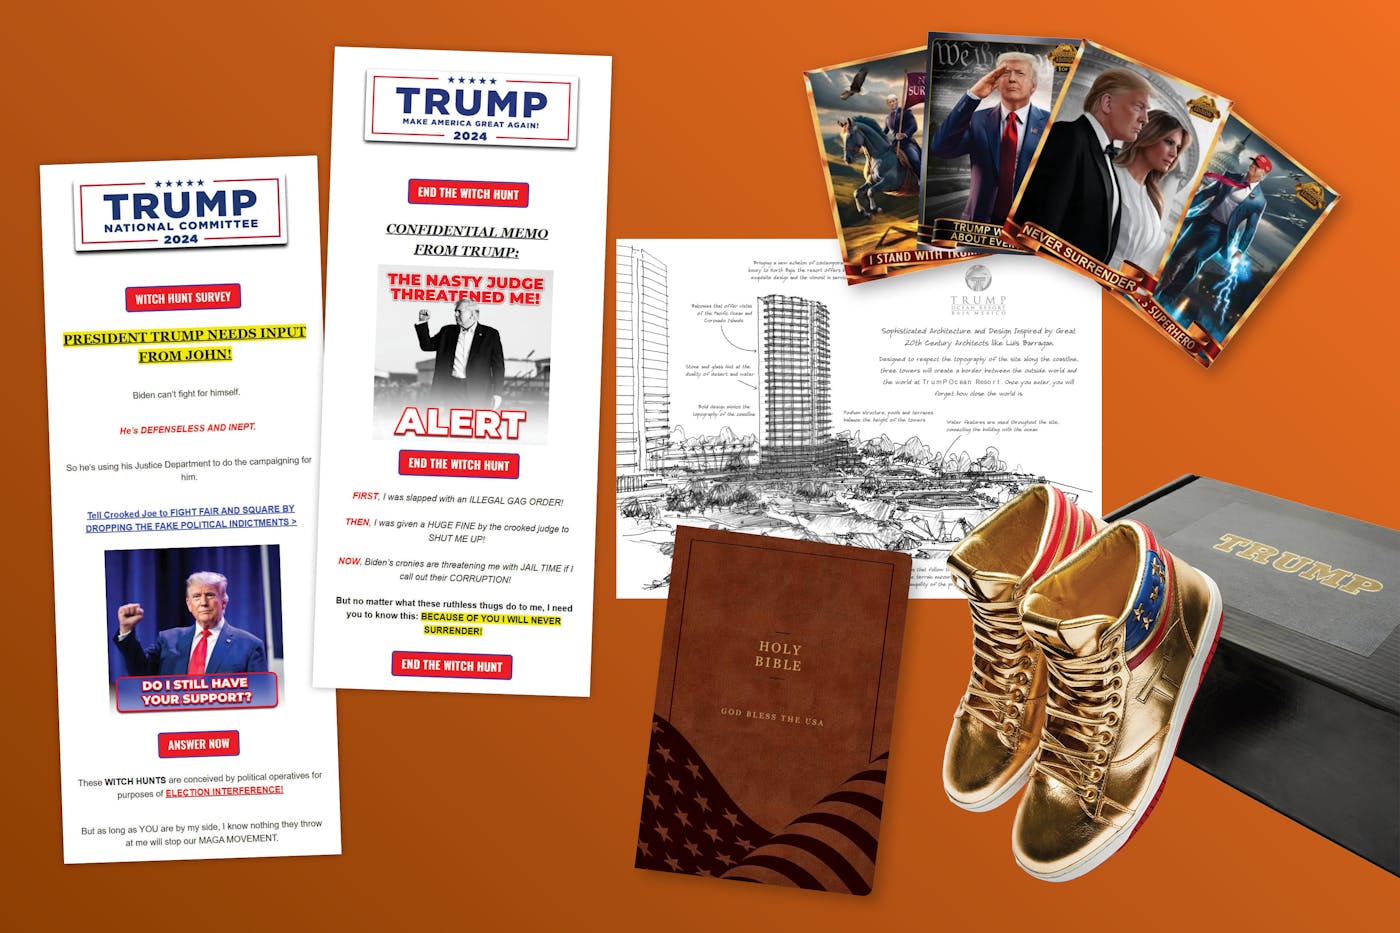 Photographs of gold sneakers, Trumps bible, Trump's playing cards, and Trump fundraising emails